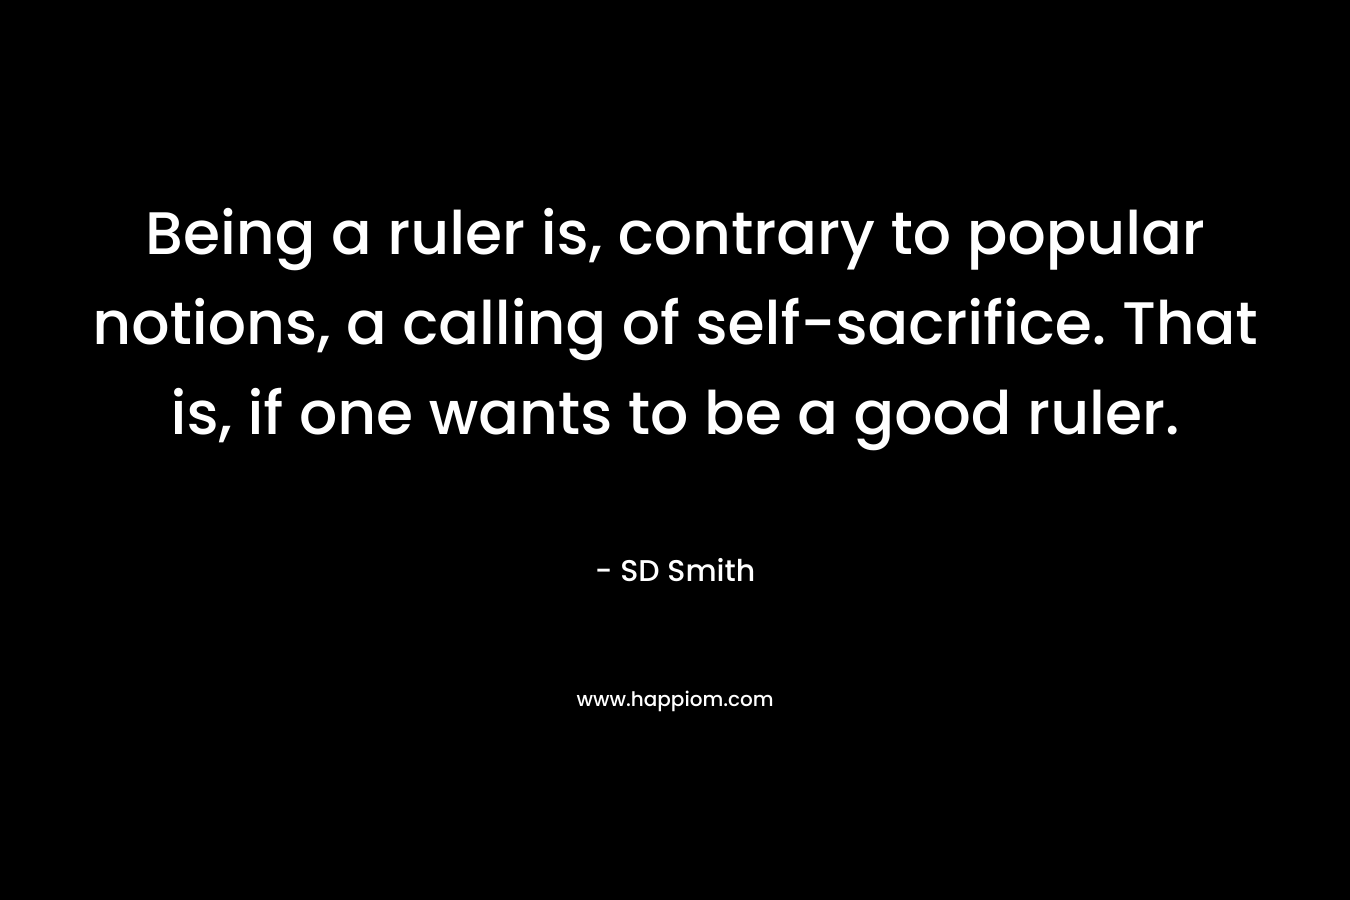 Being a ruler is, contrary to popular notions, a calling of self-sacrifice. That is, if one wants to be a good ruler.